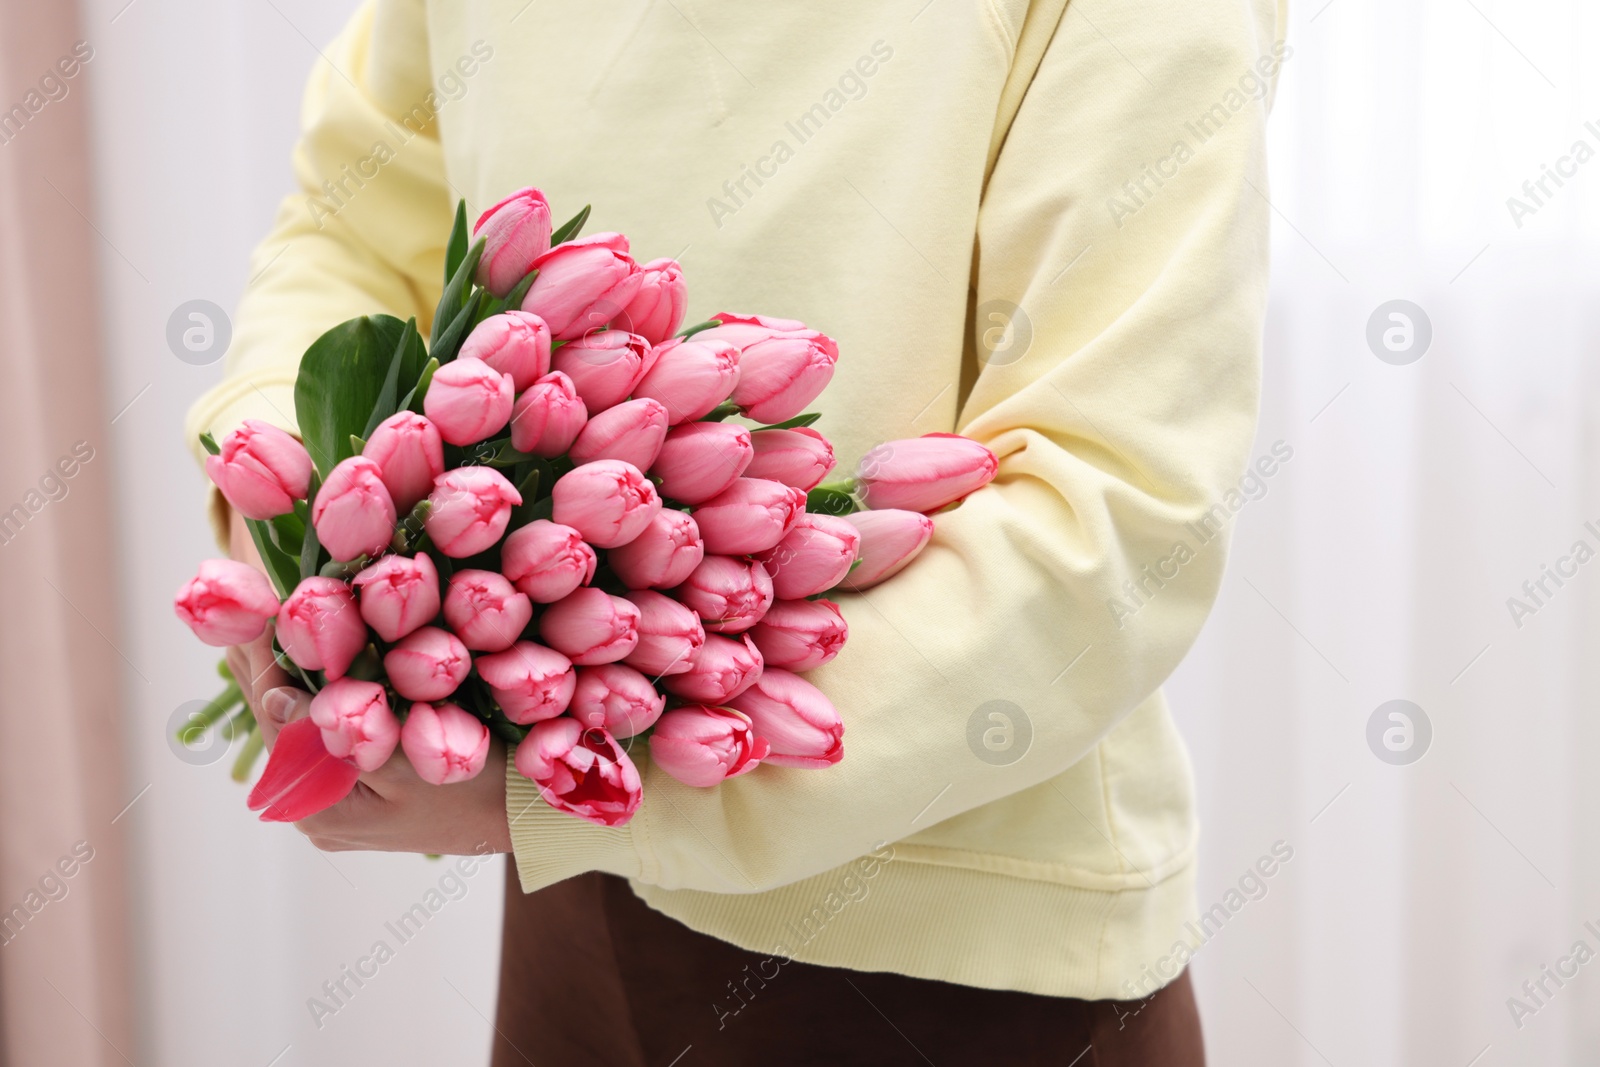 Photo of Woman holding bouquet of pink tulips indoors, closeup